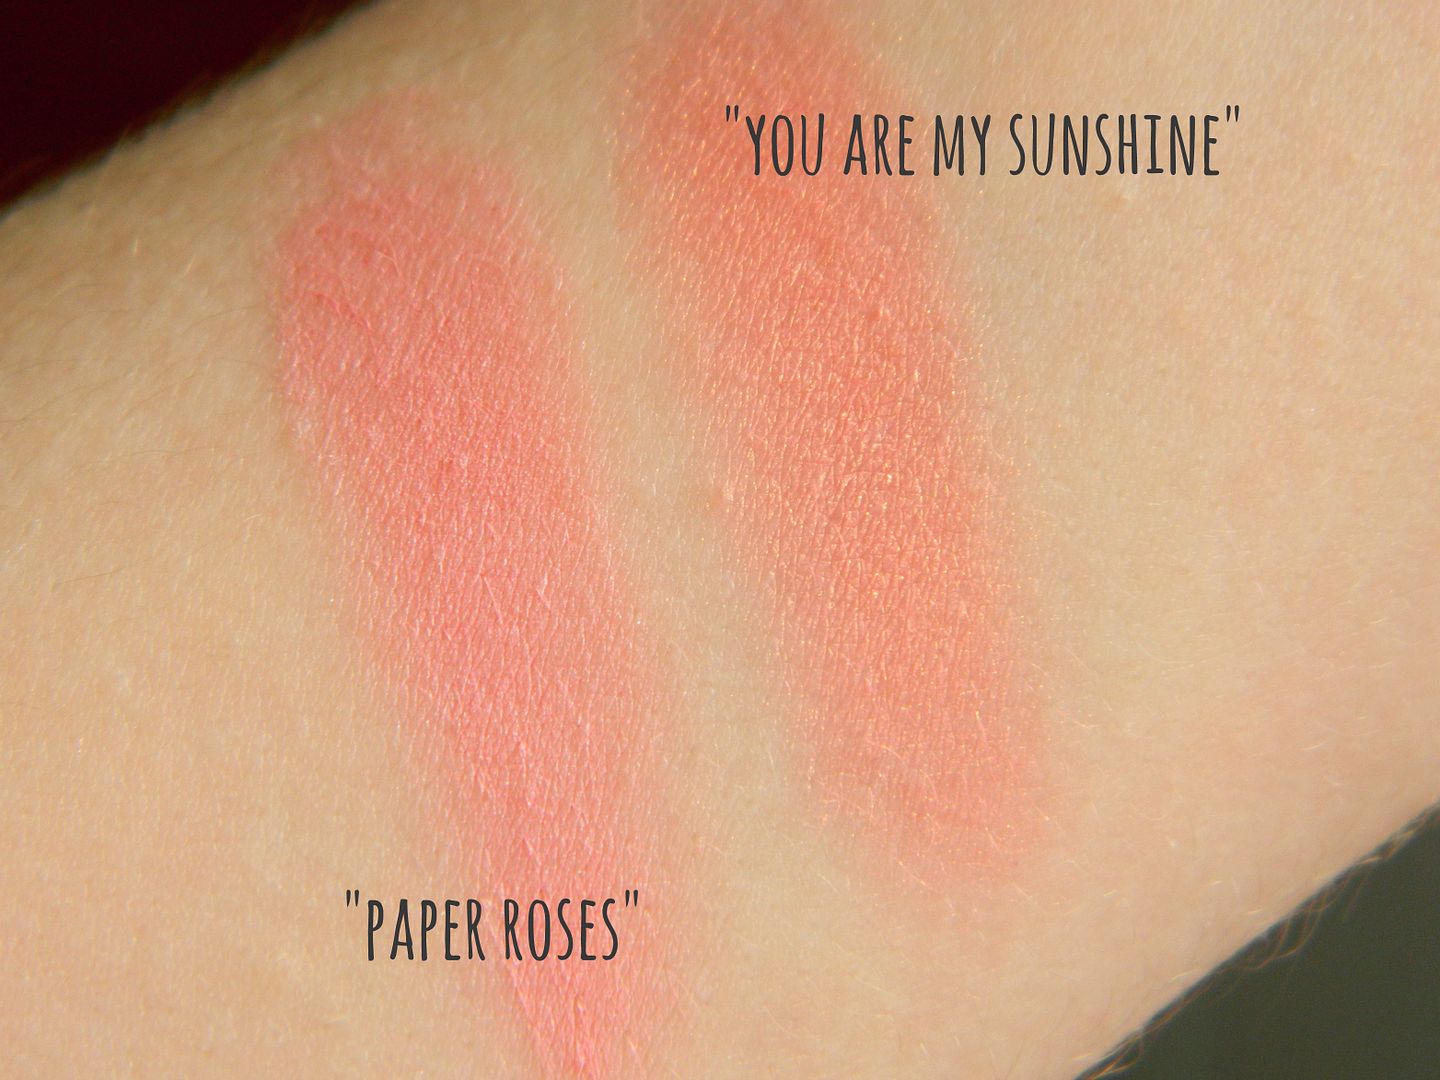 dainty Doll Powder Cream Blusher in You Are My Sunshine and Paper Roses Swatch